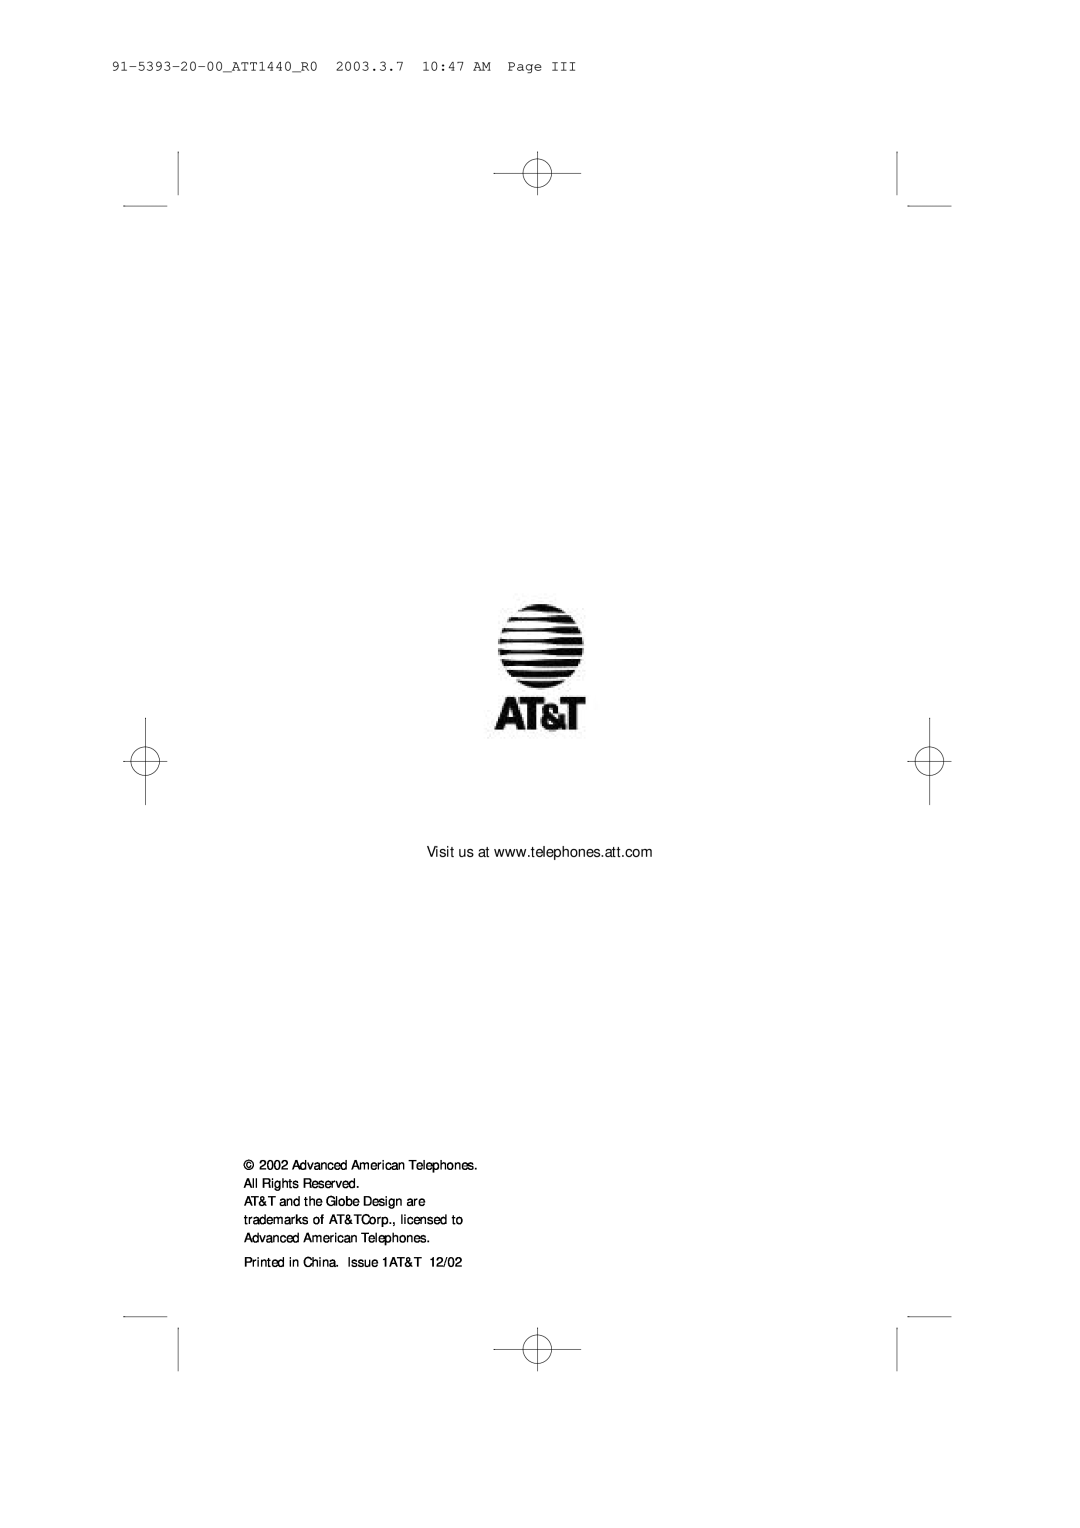 AT&T user manual 91-5393-20-00ATT1440R0 2003.3.7 1047 AM Page, Advanced American Telephones All Rights Reserved 